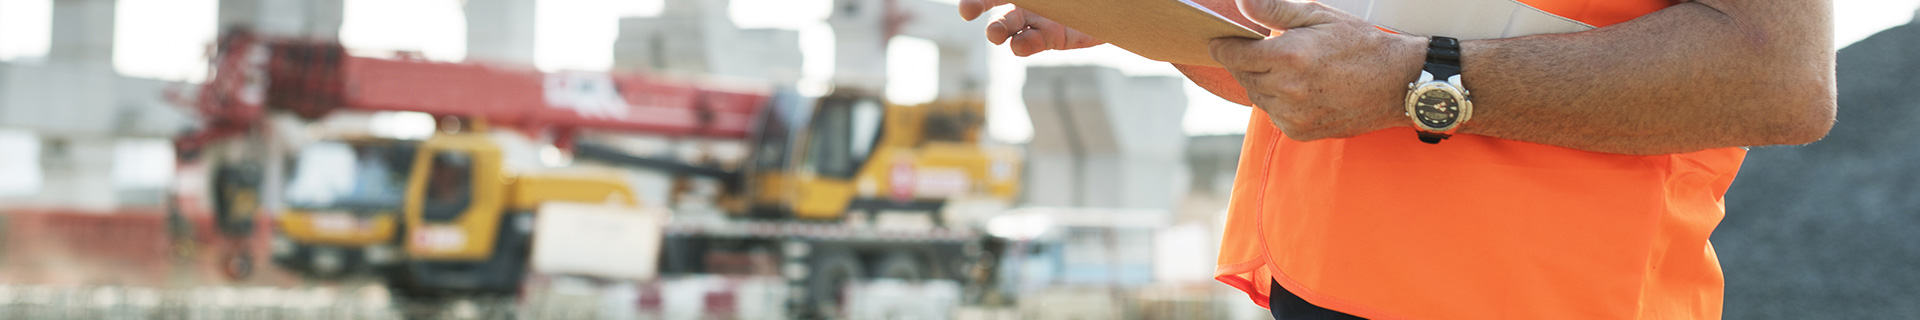 Construction Safety Basics: Work Practices